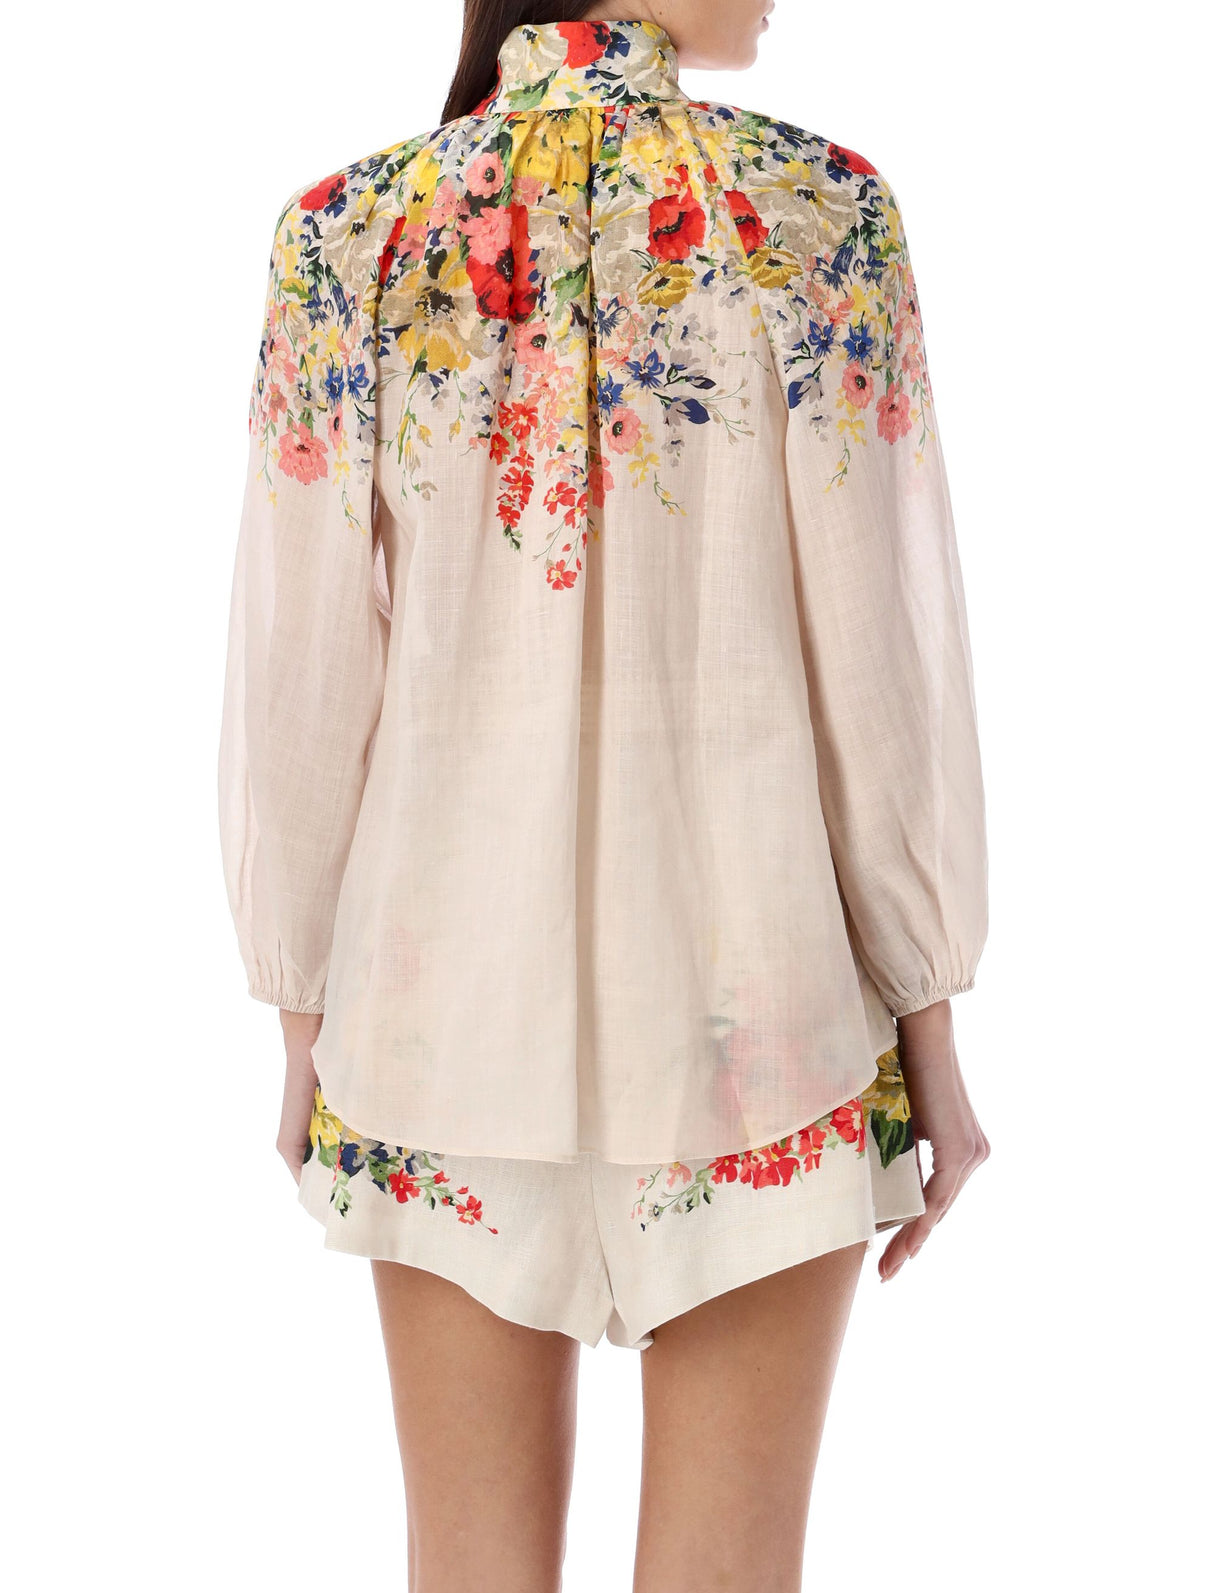 Billow Blouse in Ivory Floral with Ramie Long Sleeves and Rouleau Loops